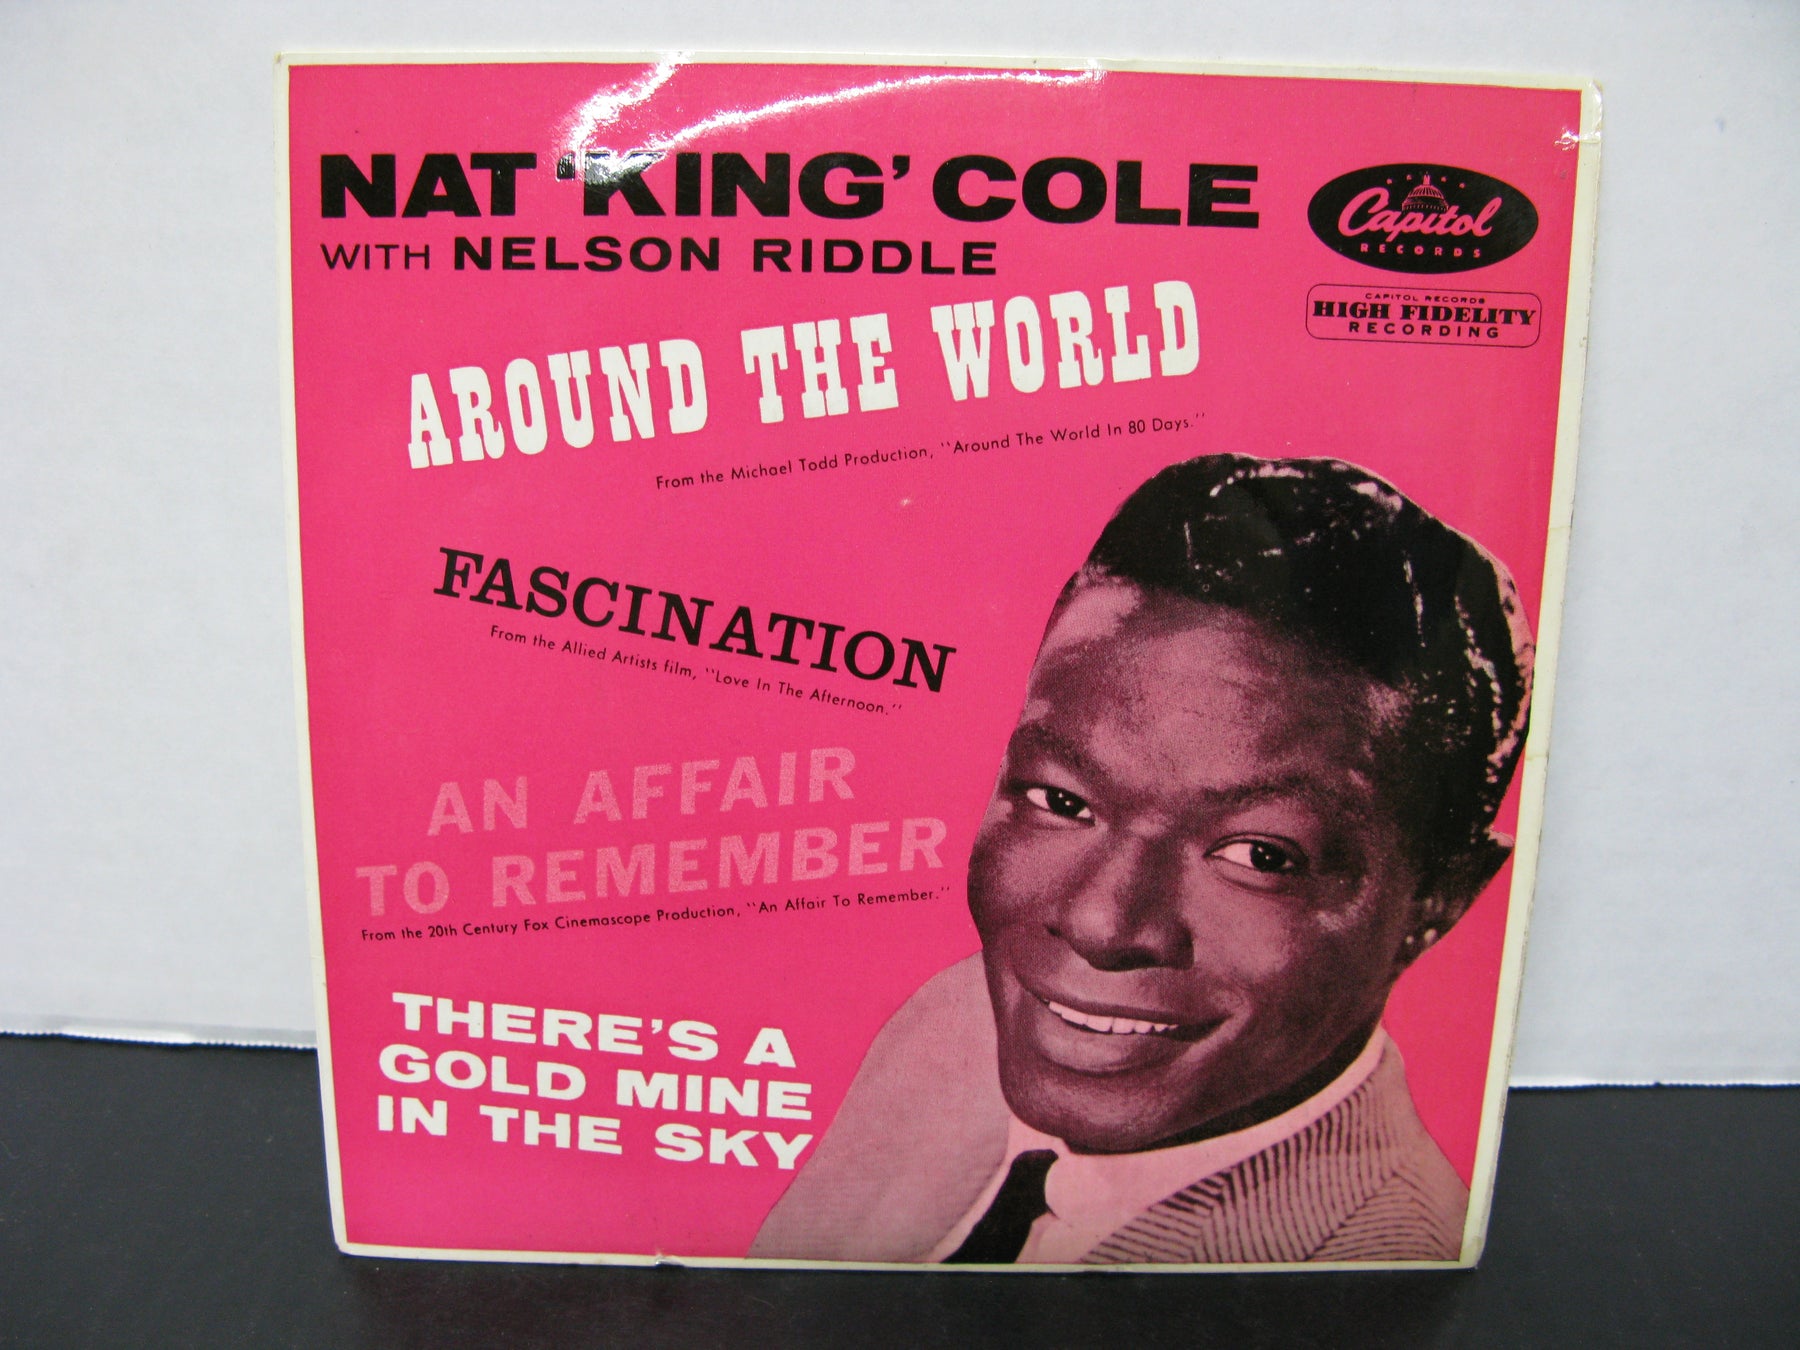 Nat 'King' Cole with Nelson Riddle - Around the World Record Vinyl